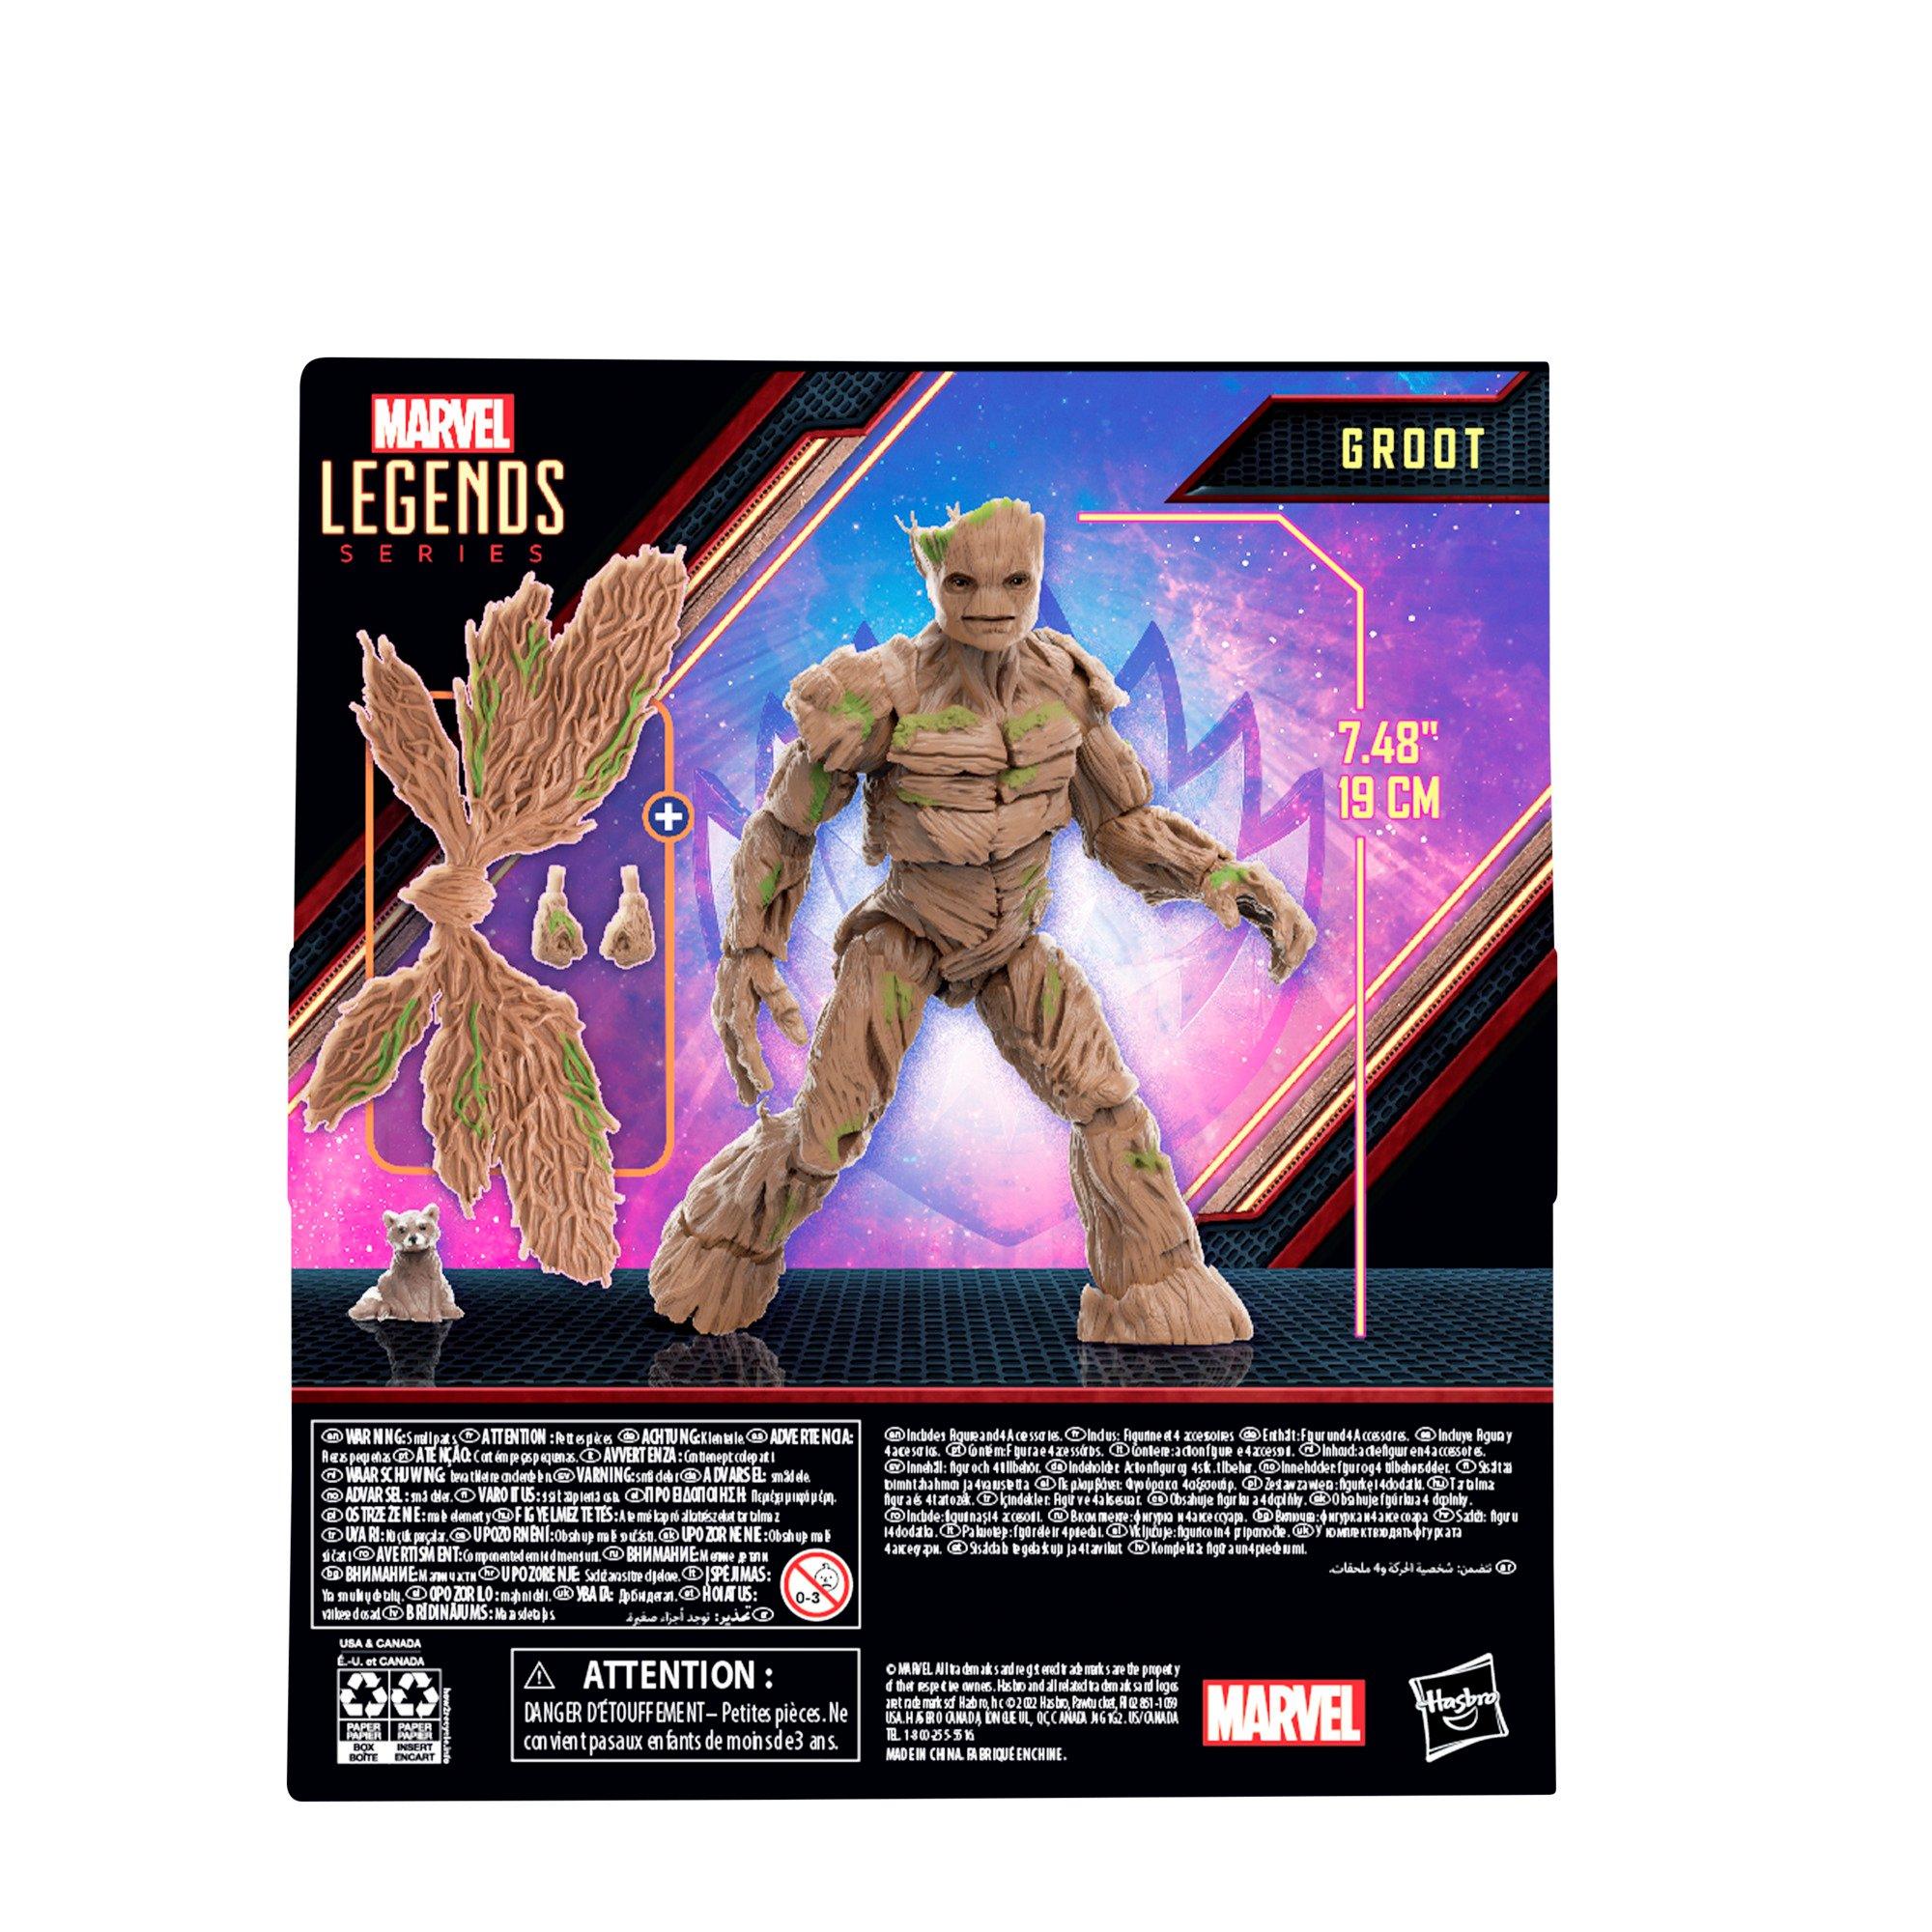 Marvel Marvel Legends Guardians of the Galaxy Comic Edition Exclusive  Action Figure 5-Pack Groot, Drax, Rocket, Star Lord, Gamora Baby Groot  Hasbro - ToyWiz